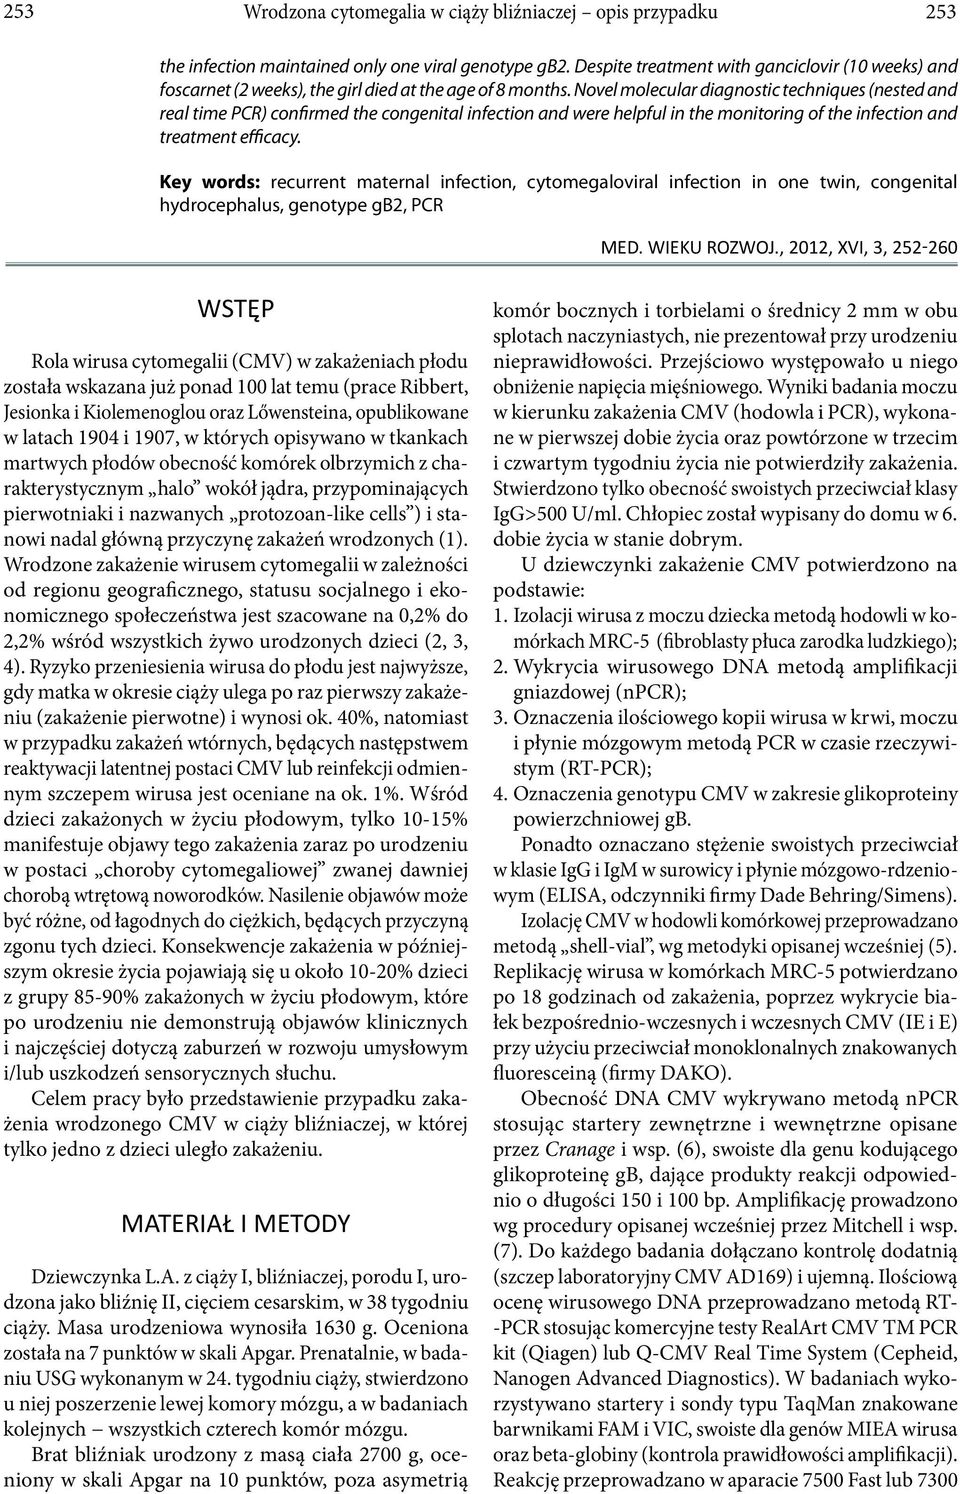 Novel molecular diagnostic techniques (nested and real time PCR) confirmed the congenital infection and were helpful in the monitoring of the infection and treatment efficacy.